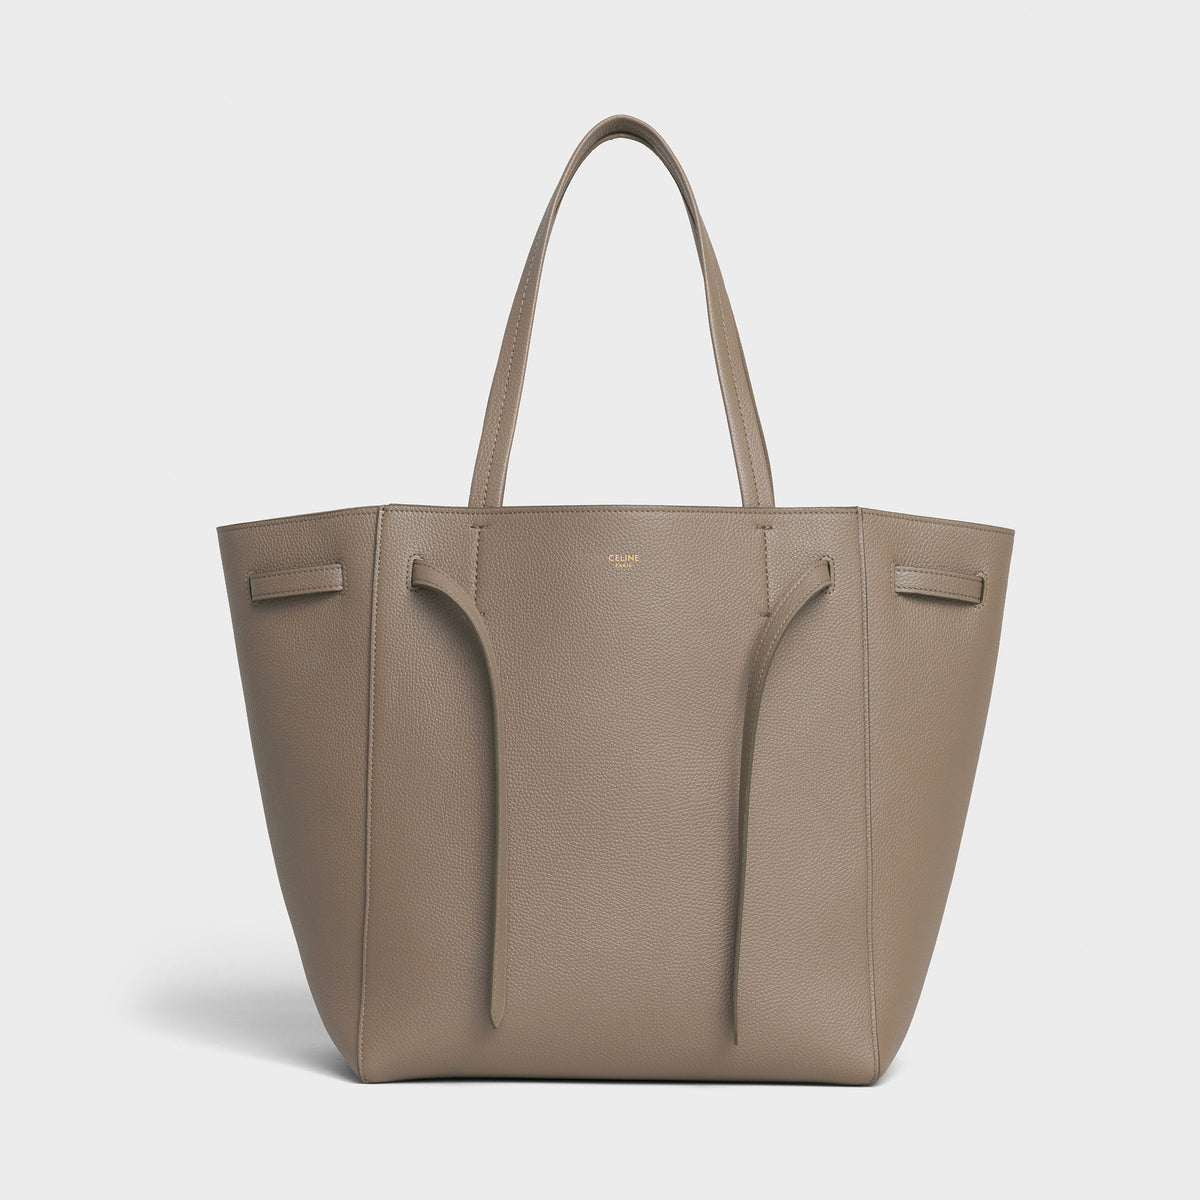 SMALL CABAS PHANTOM TOTE BAG IN SOFT GRAINED CALFSKIN TAUPE